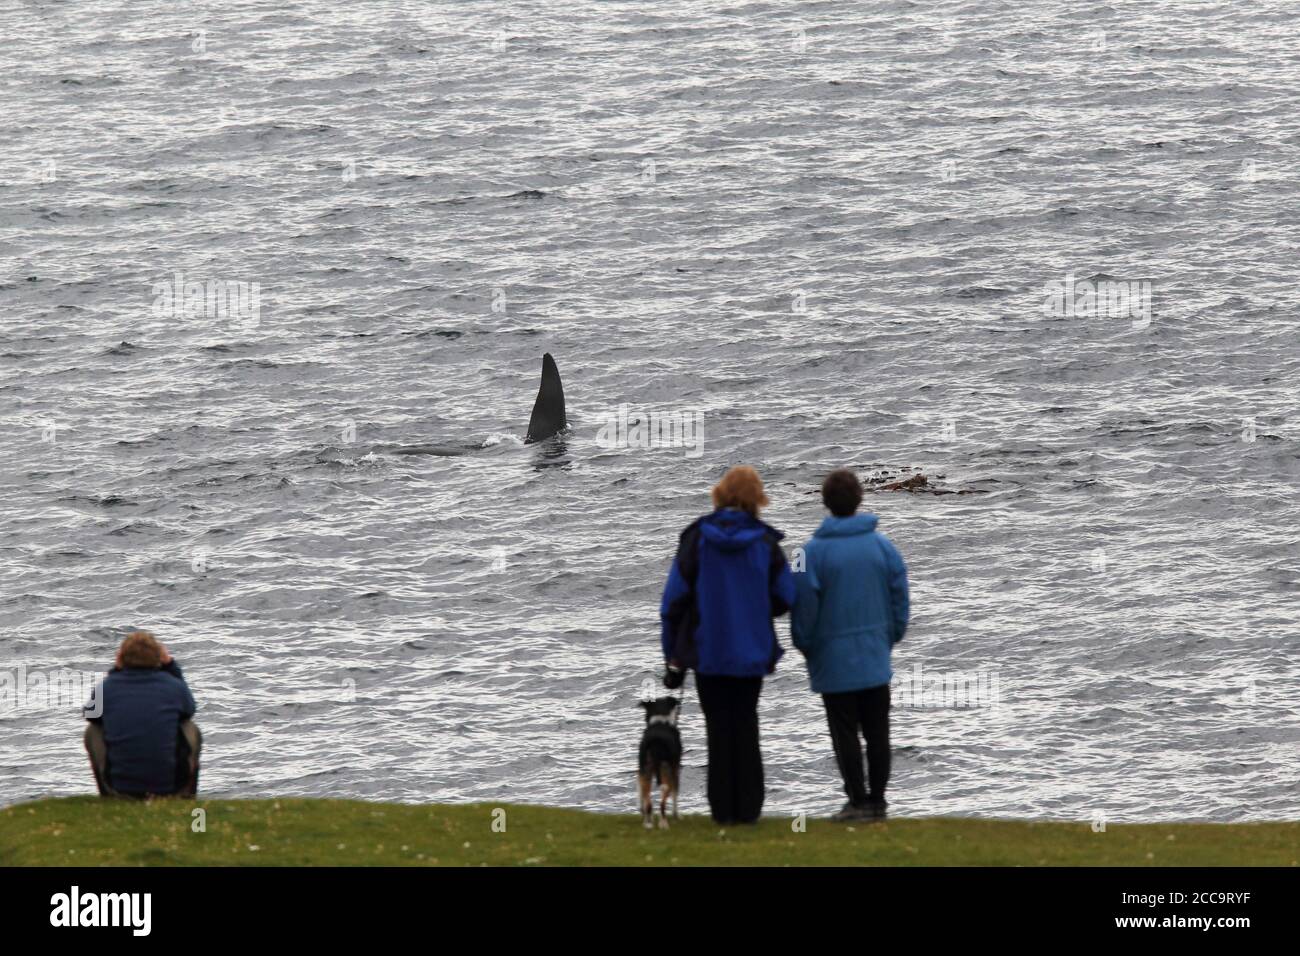 Killer Whale (Orcinus orca) swimming of the coast of Scotland with people looking on. Stock Photo